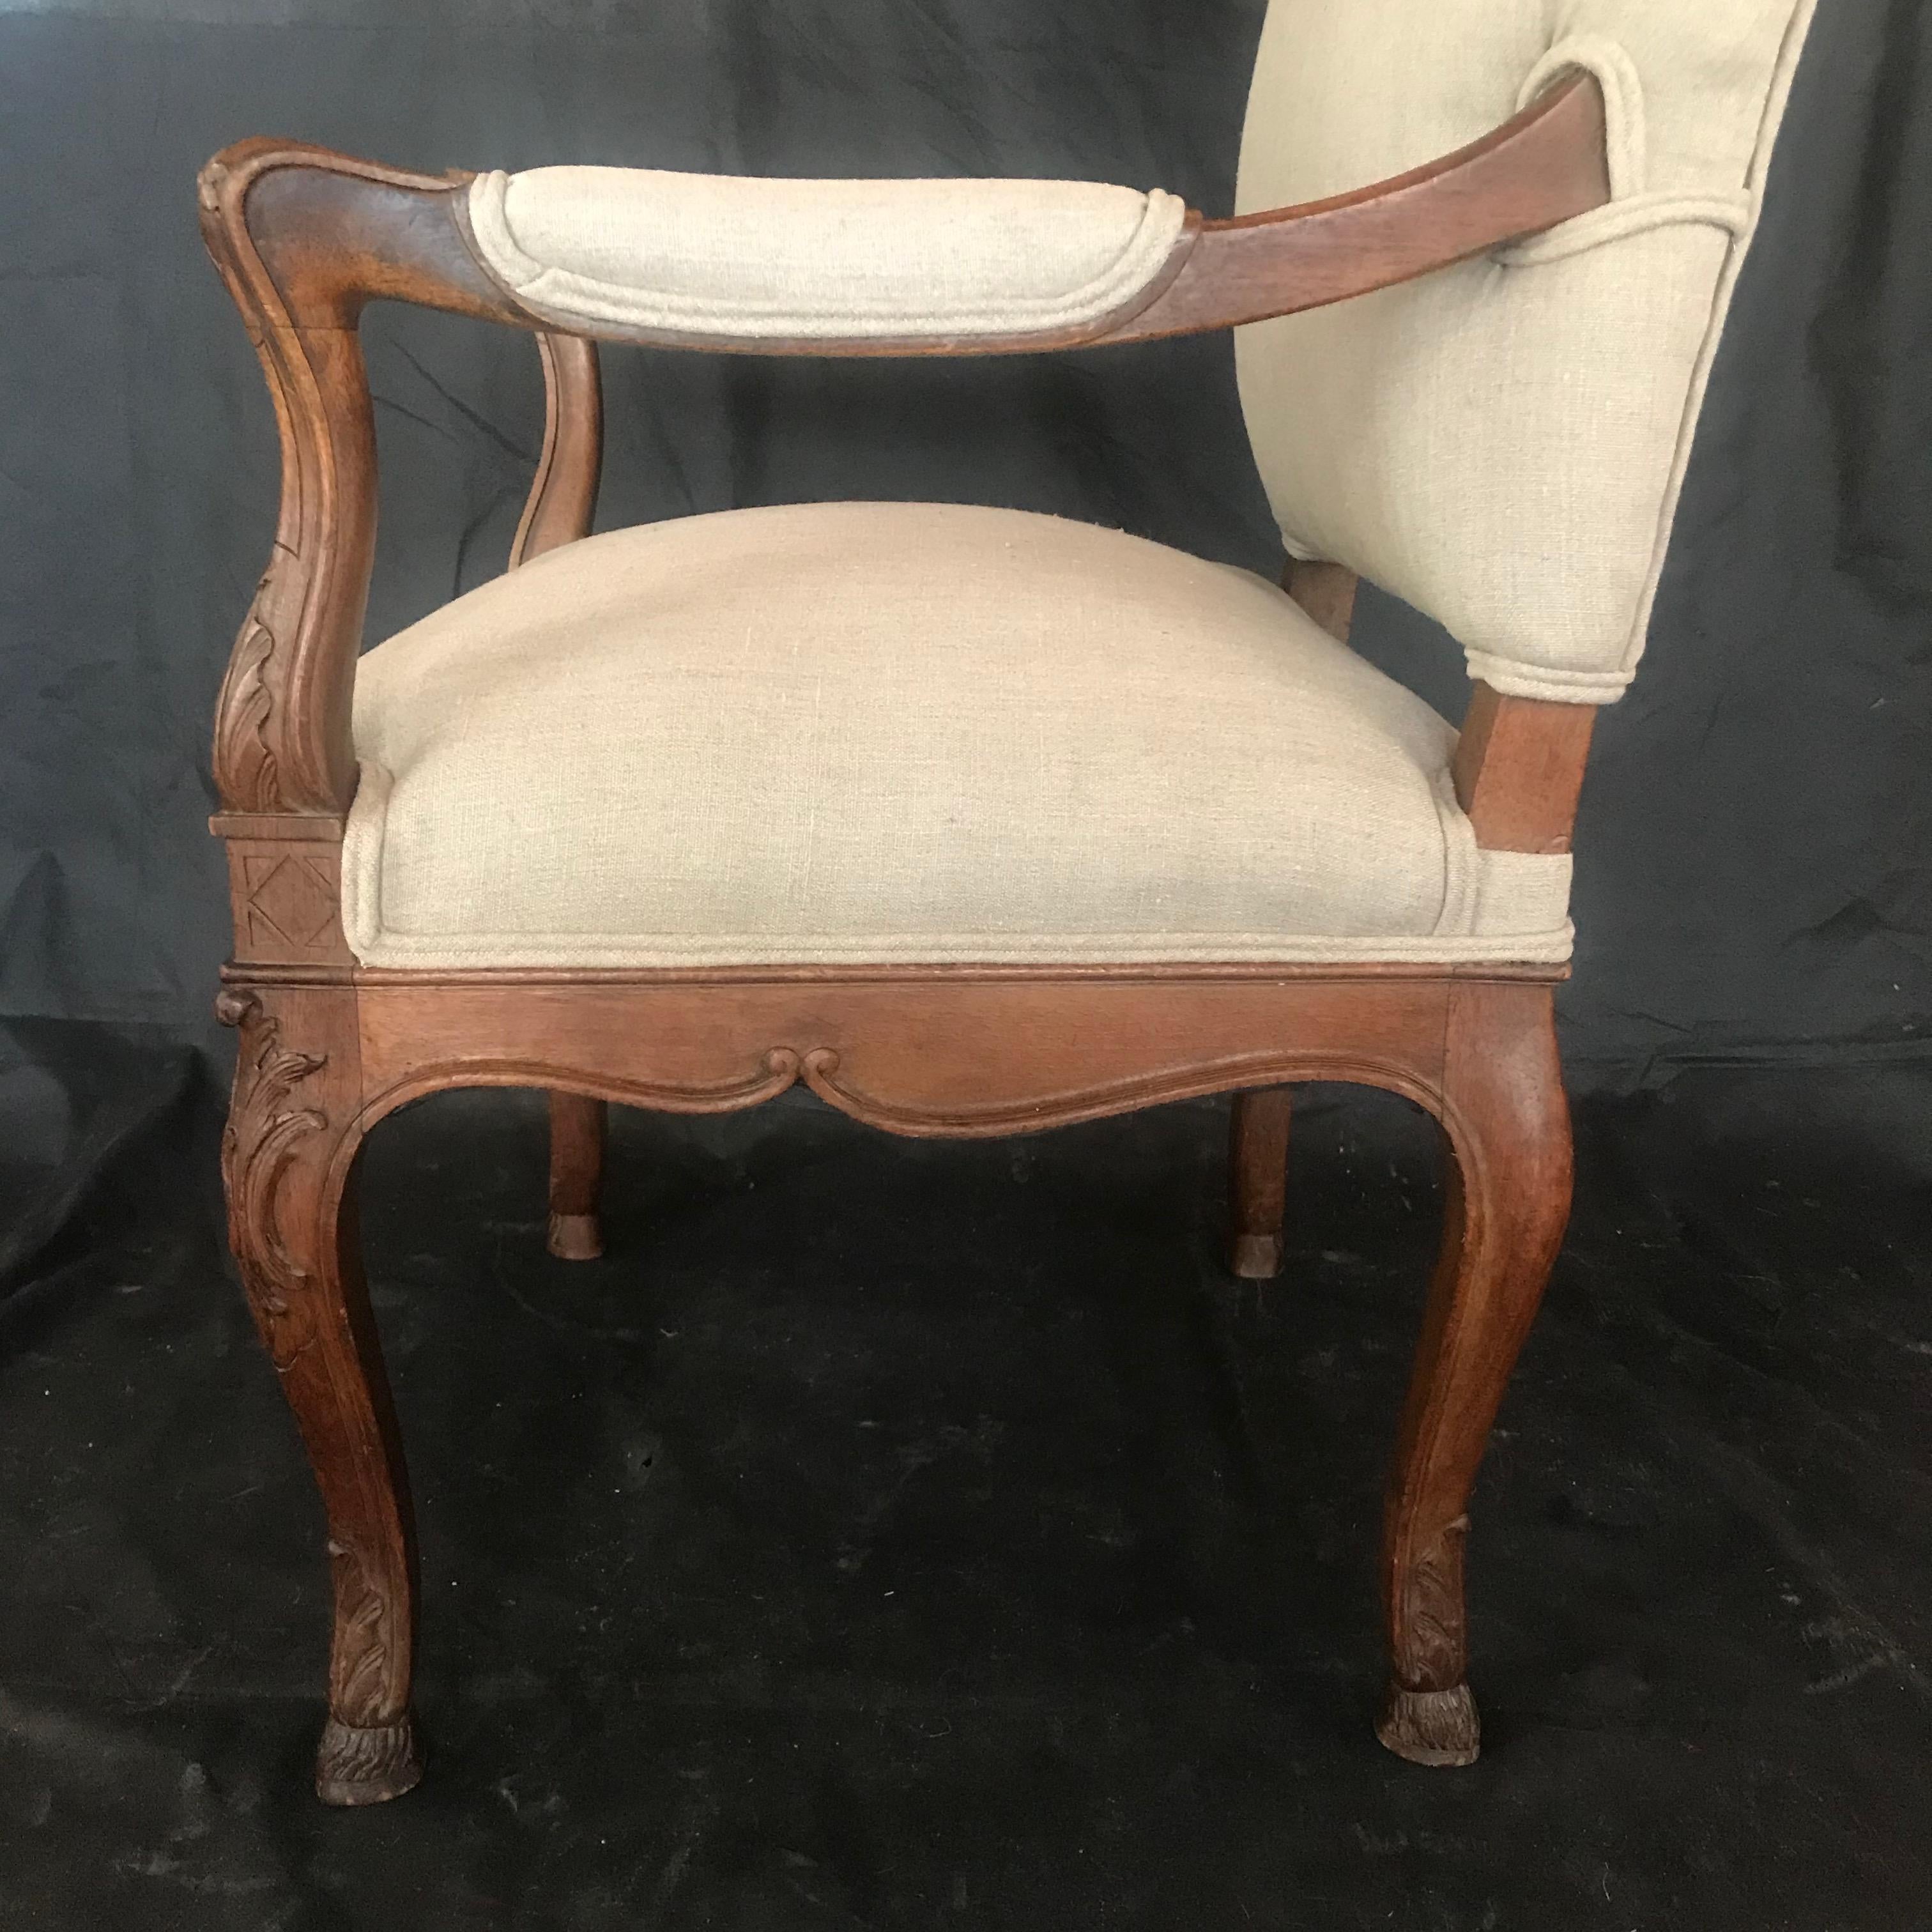 Upholstery 19th Century French Carved Regency Style Walnut Chair with Scrolled Arms For Sale